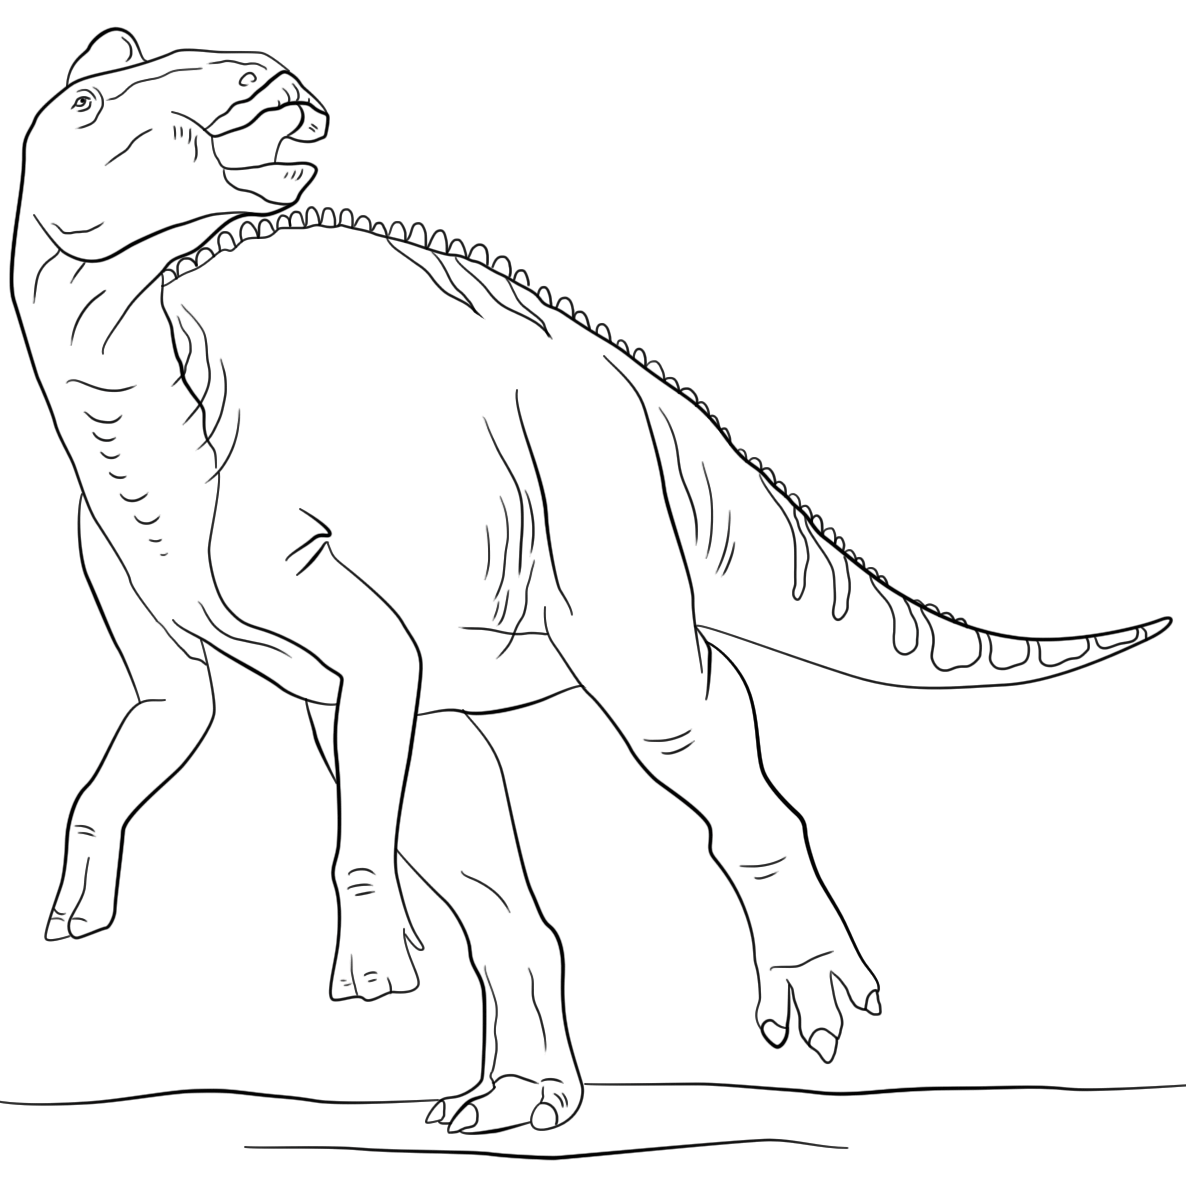 maiasaura coloring pages to print